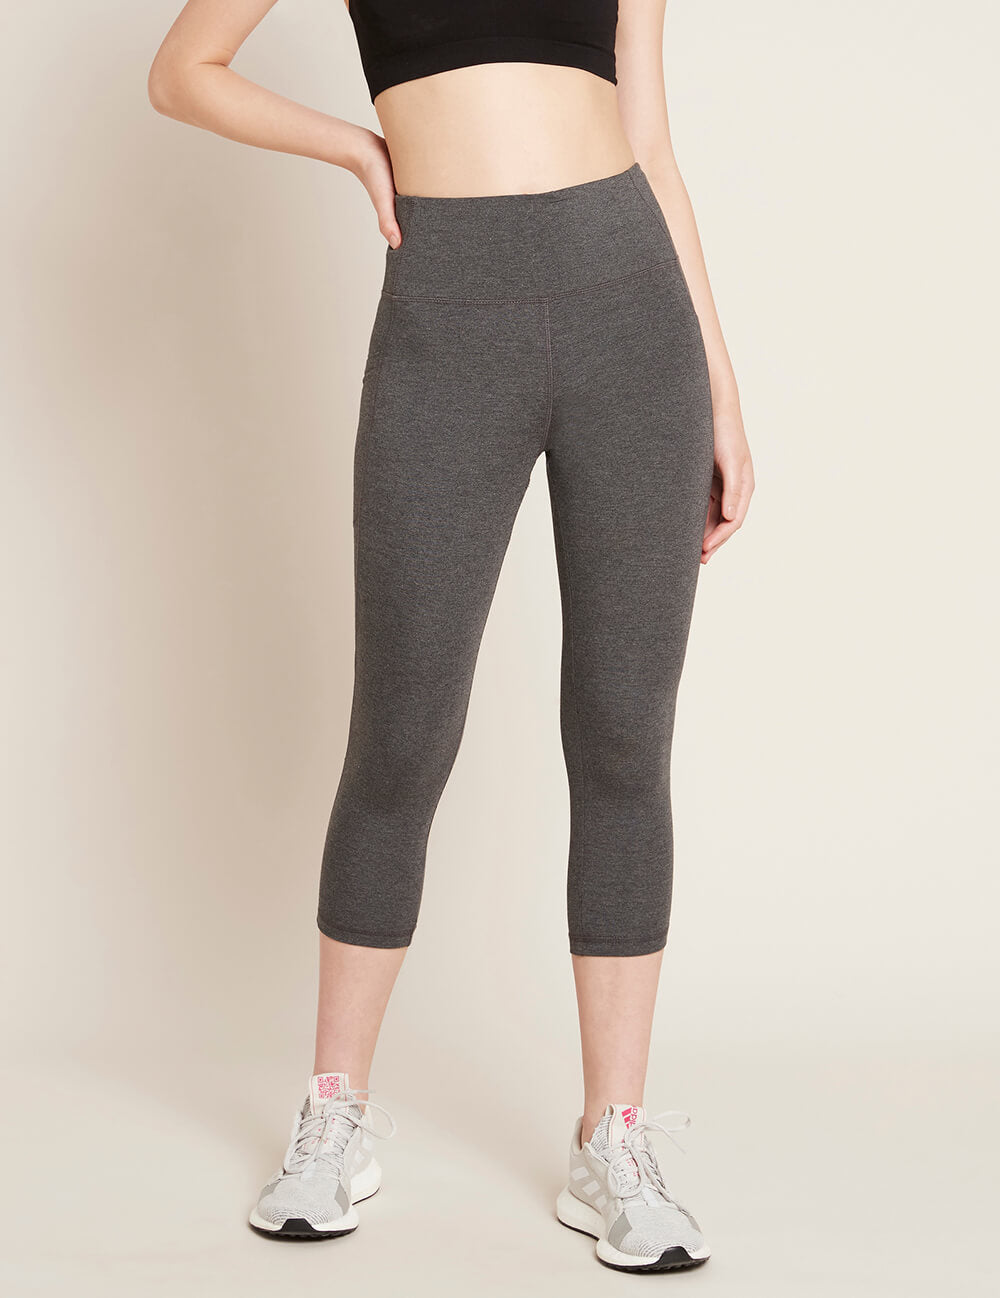 Boody Bamboo Active Blended High-Waisted 3/4 Leggings with Pockets in Dark Grey Front View